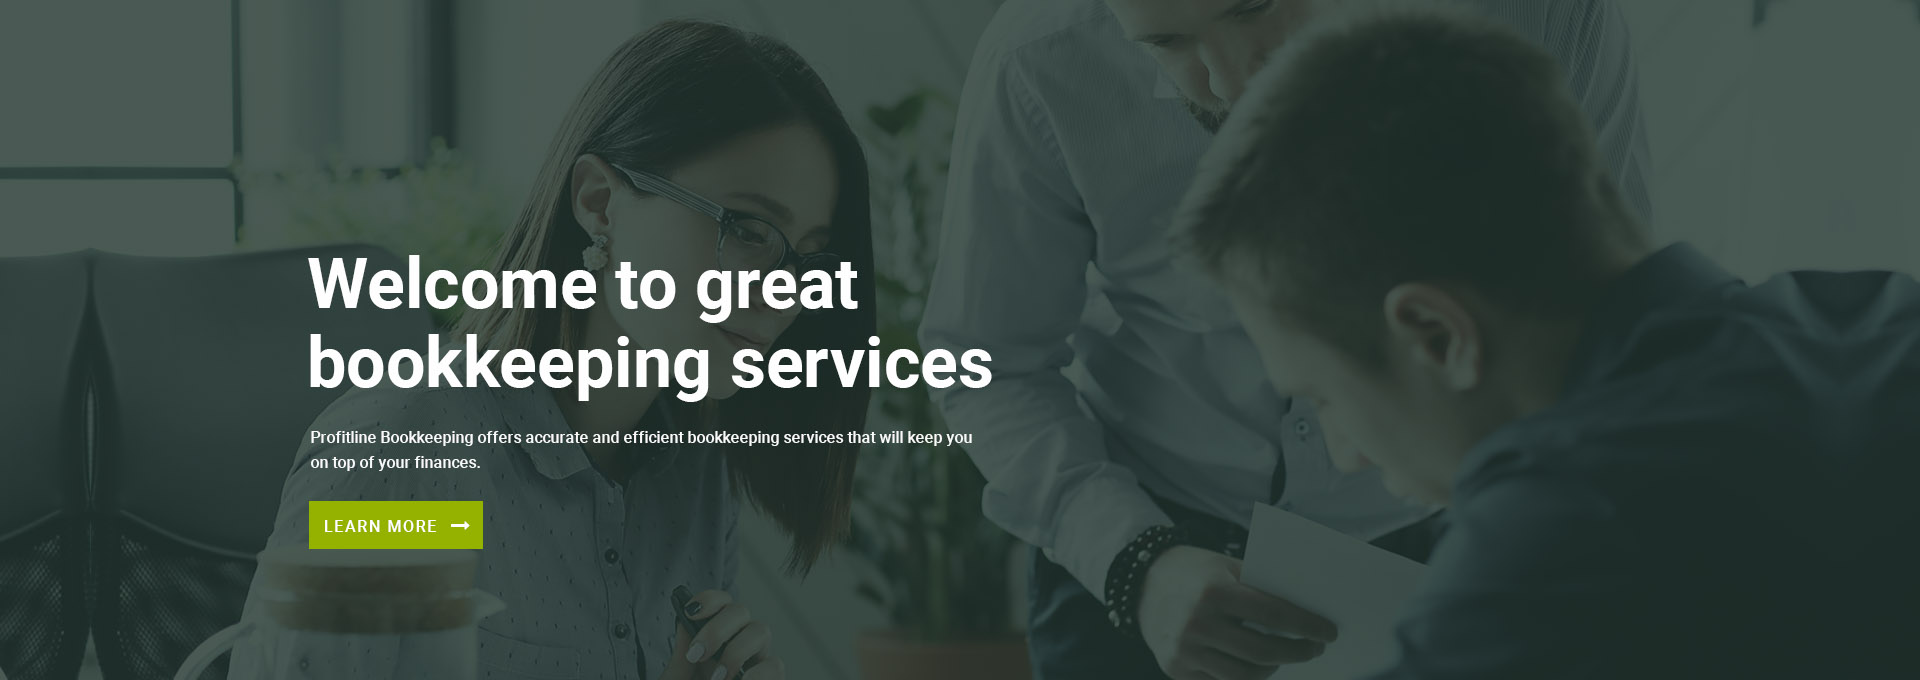 WELCOME TO GREAT BOOKKEEPING SERVICES